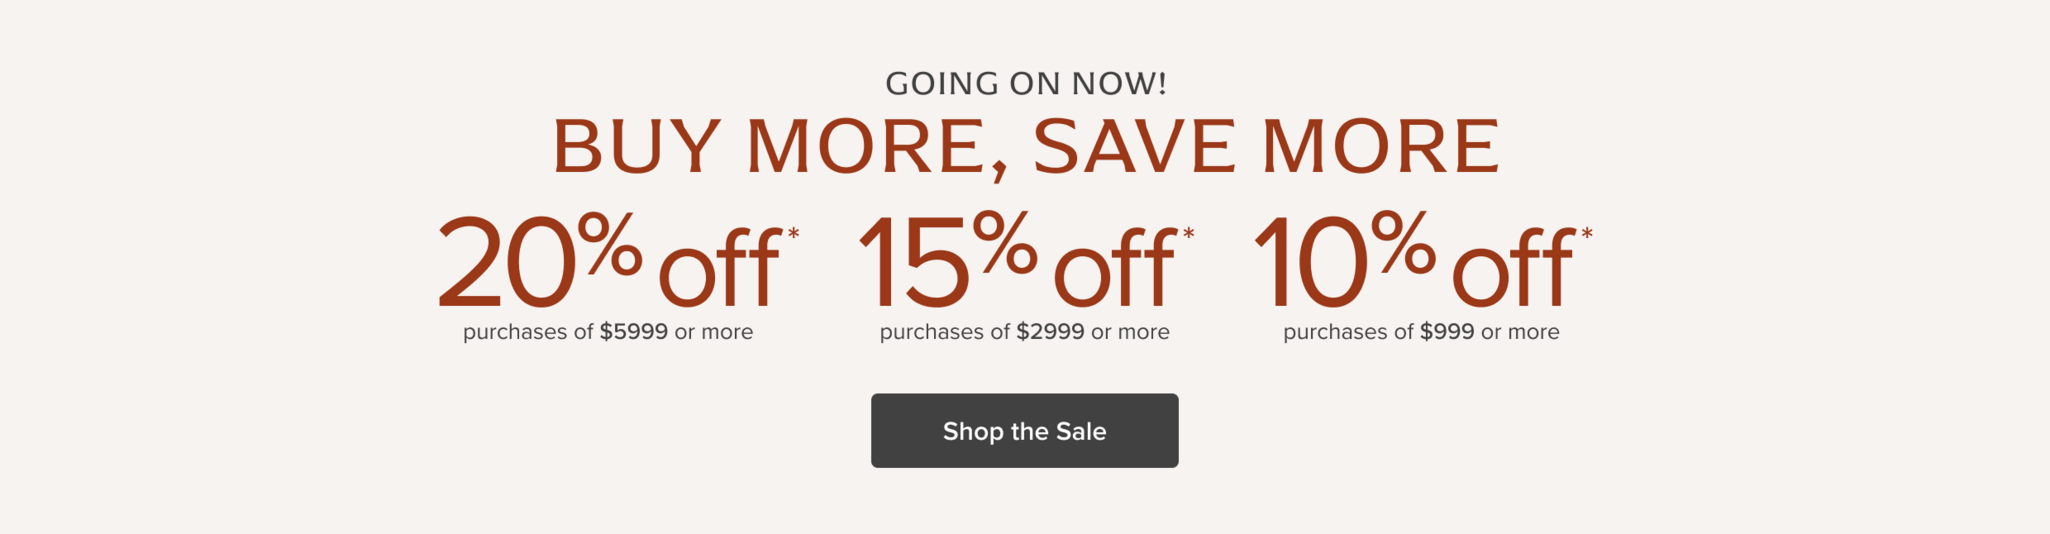 Buy More, Save More: 20% Off $5999+ | 15% Off $2999+ | 10% Off $999+ Shop Now